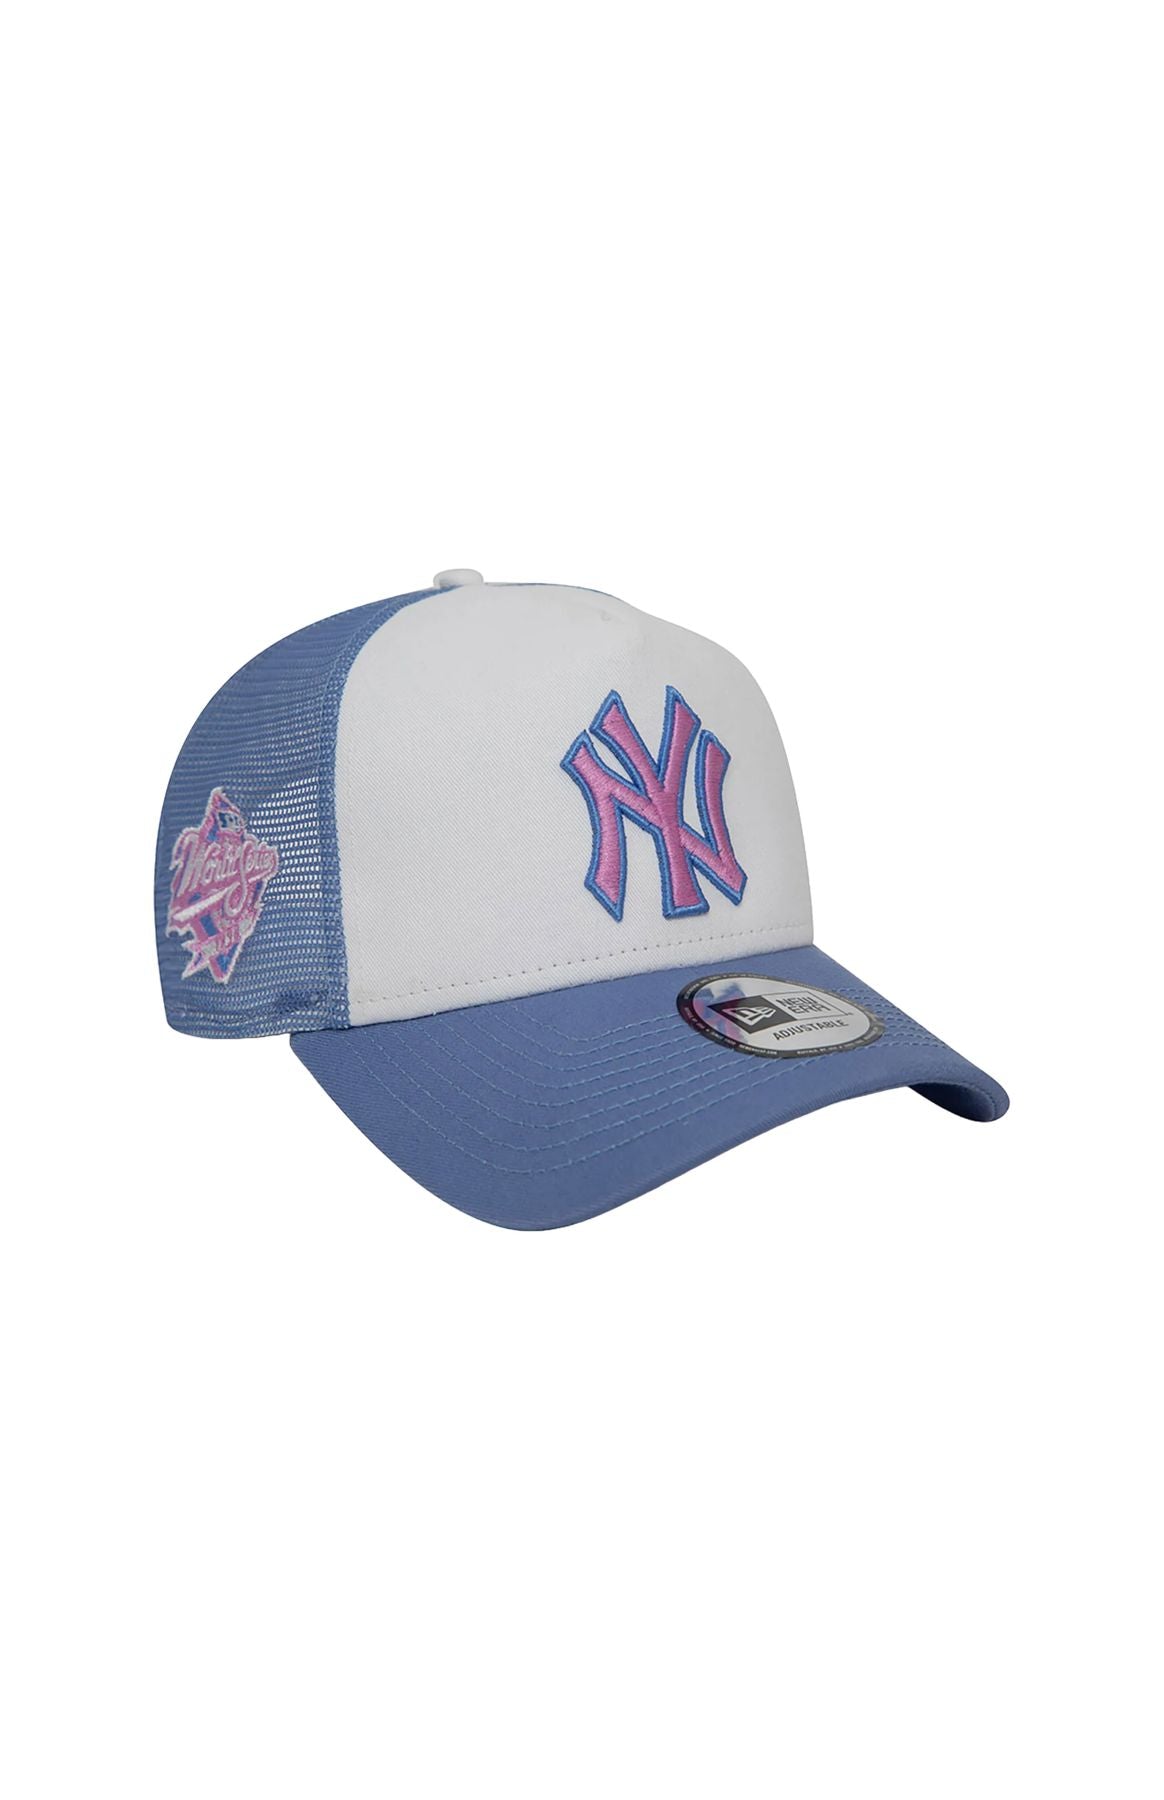 NY CUP INDACO PINK -  -